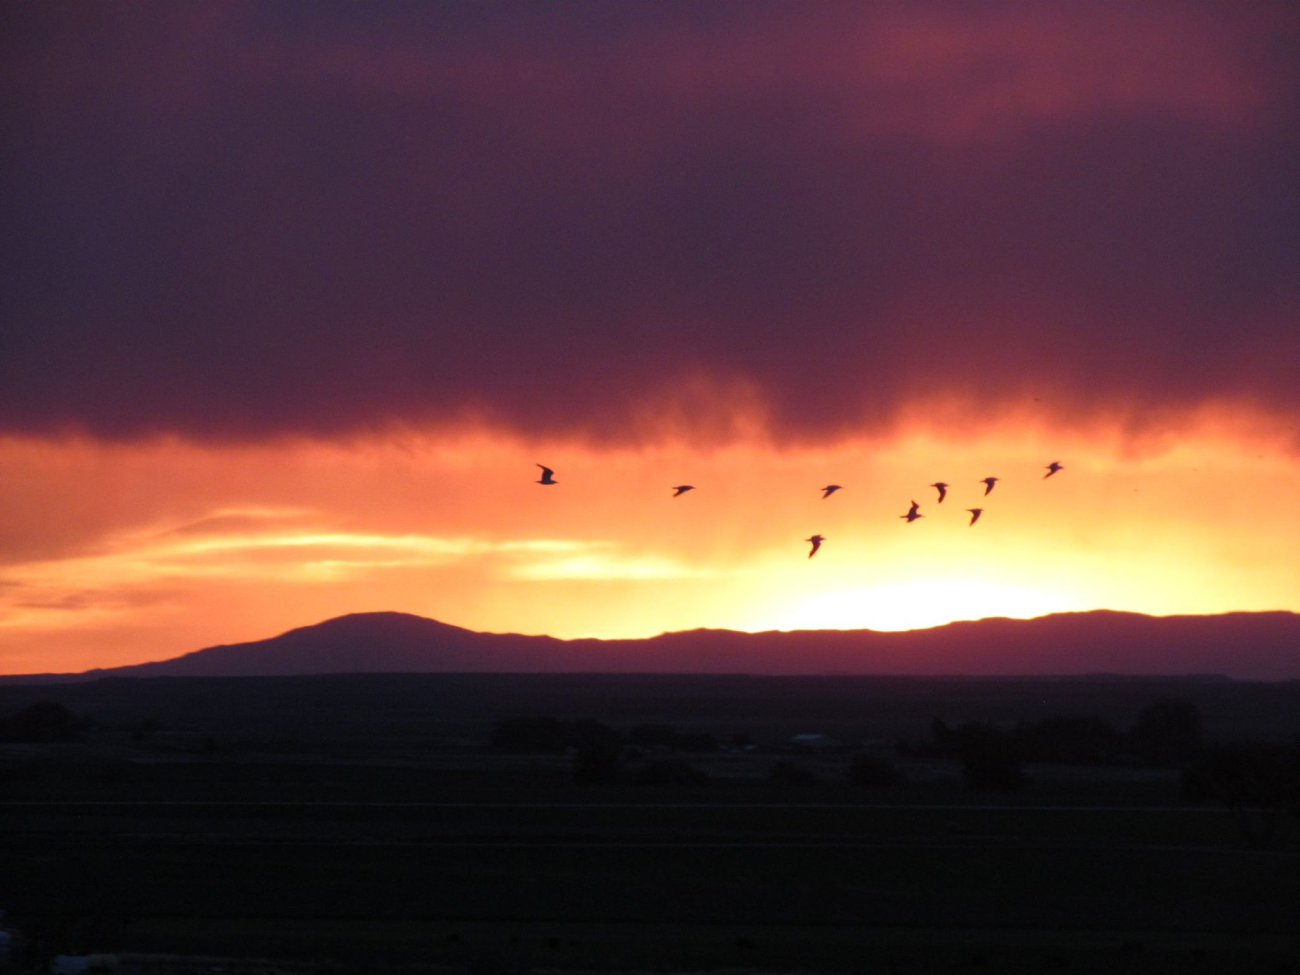 Seagulls ? or perhaps some more appropriate Wyoming birds at sunset